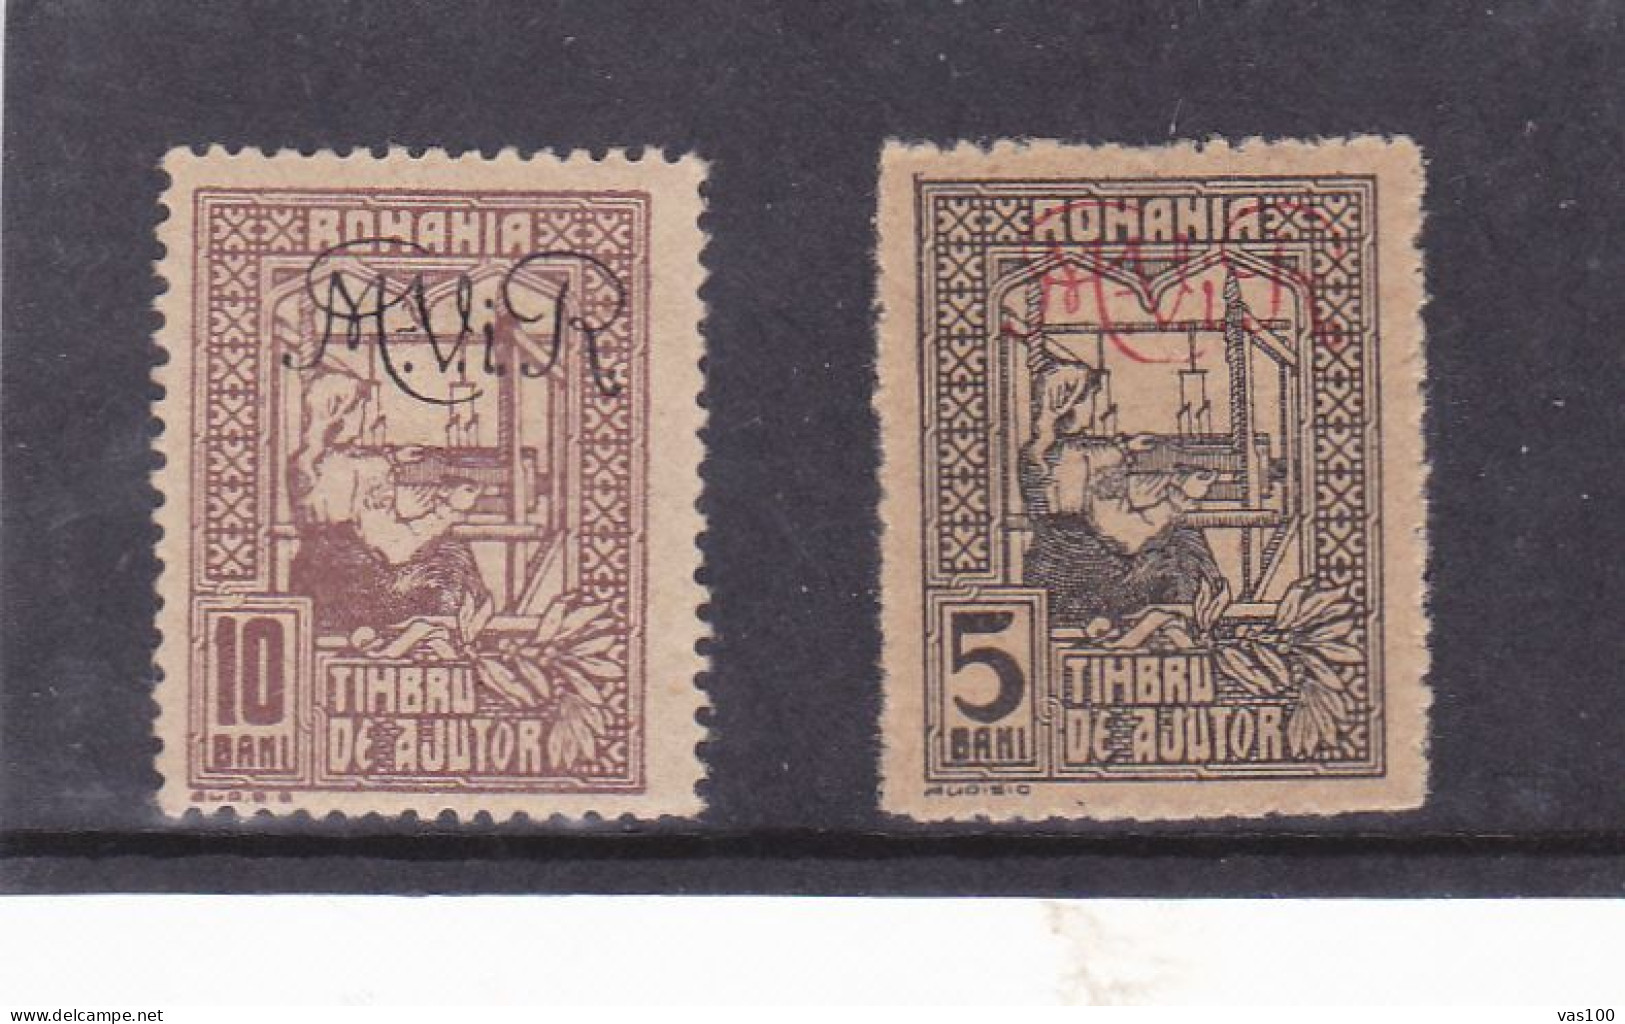 Germany WW1 Occupation In Romania 1917 MViR 5 +10 BANI 2 STAMPS POSTAGE DUE MINT - Foreign Occupations